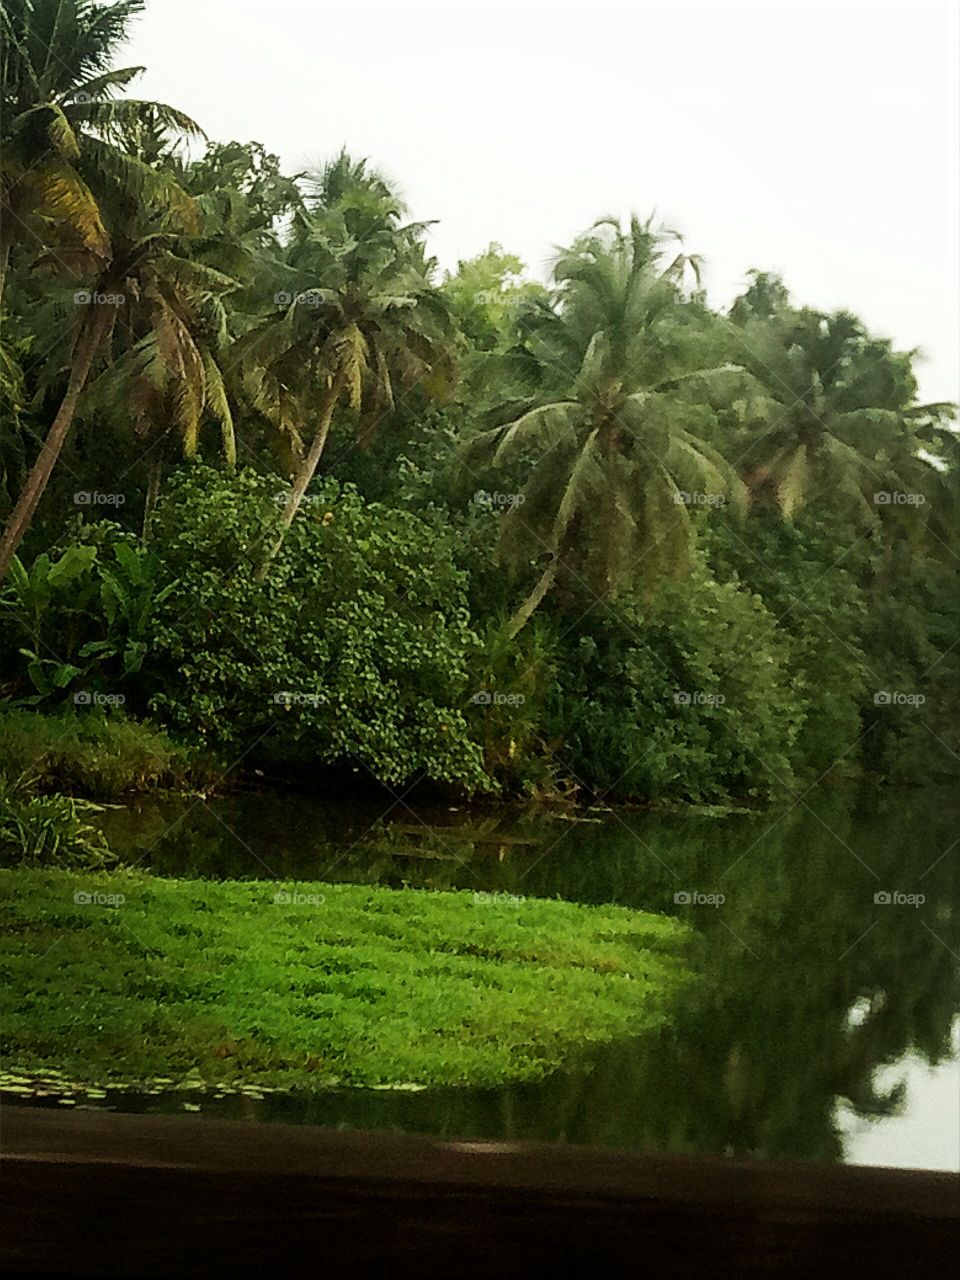 Kerala The God's Own Country